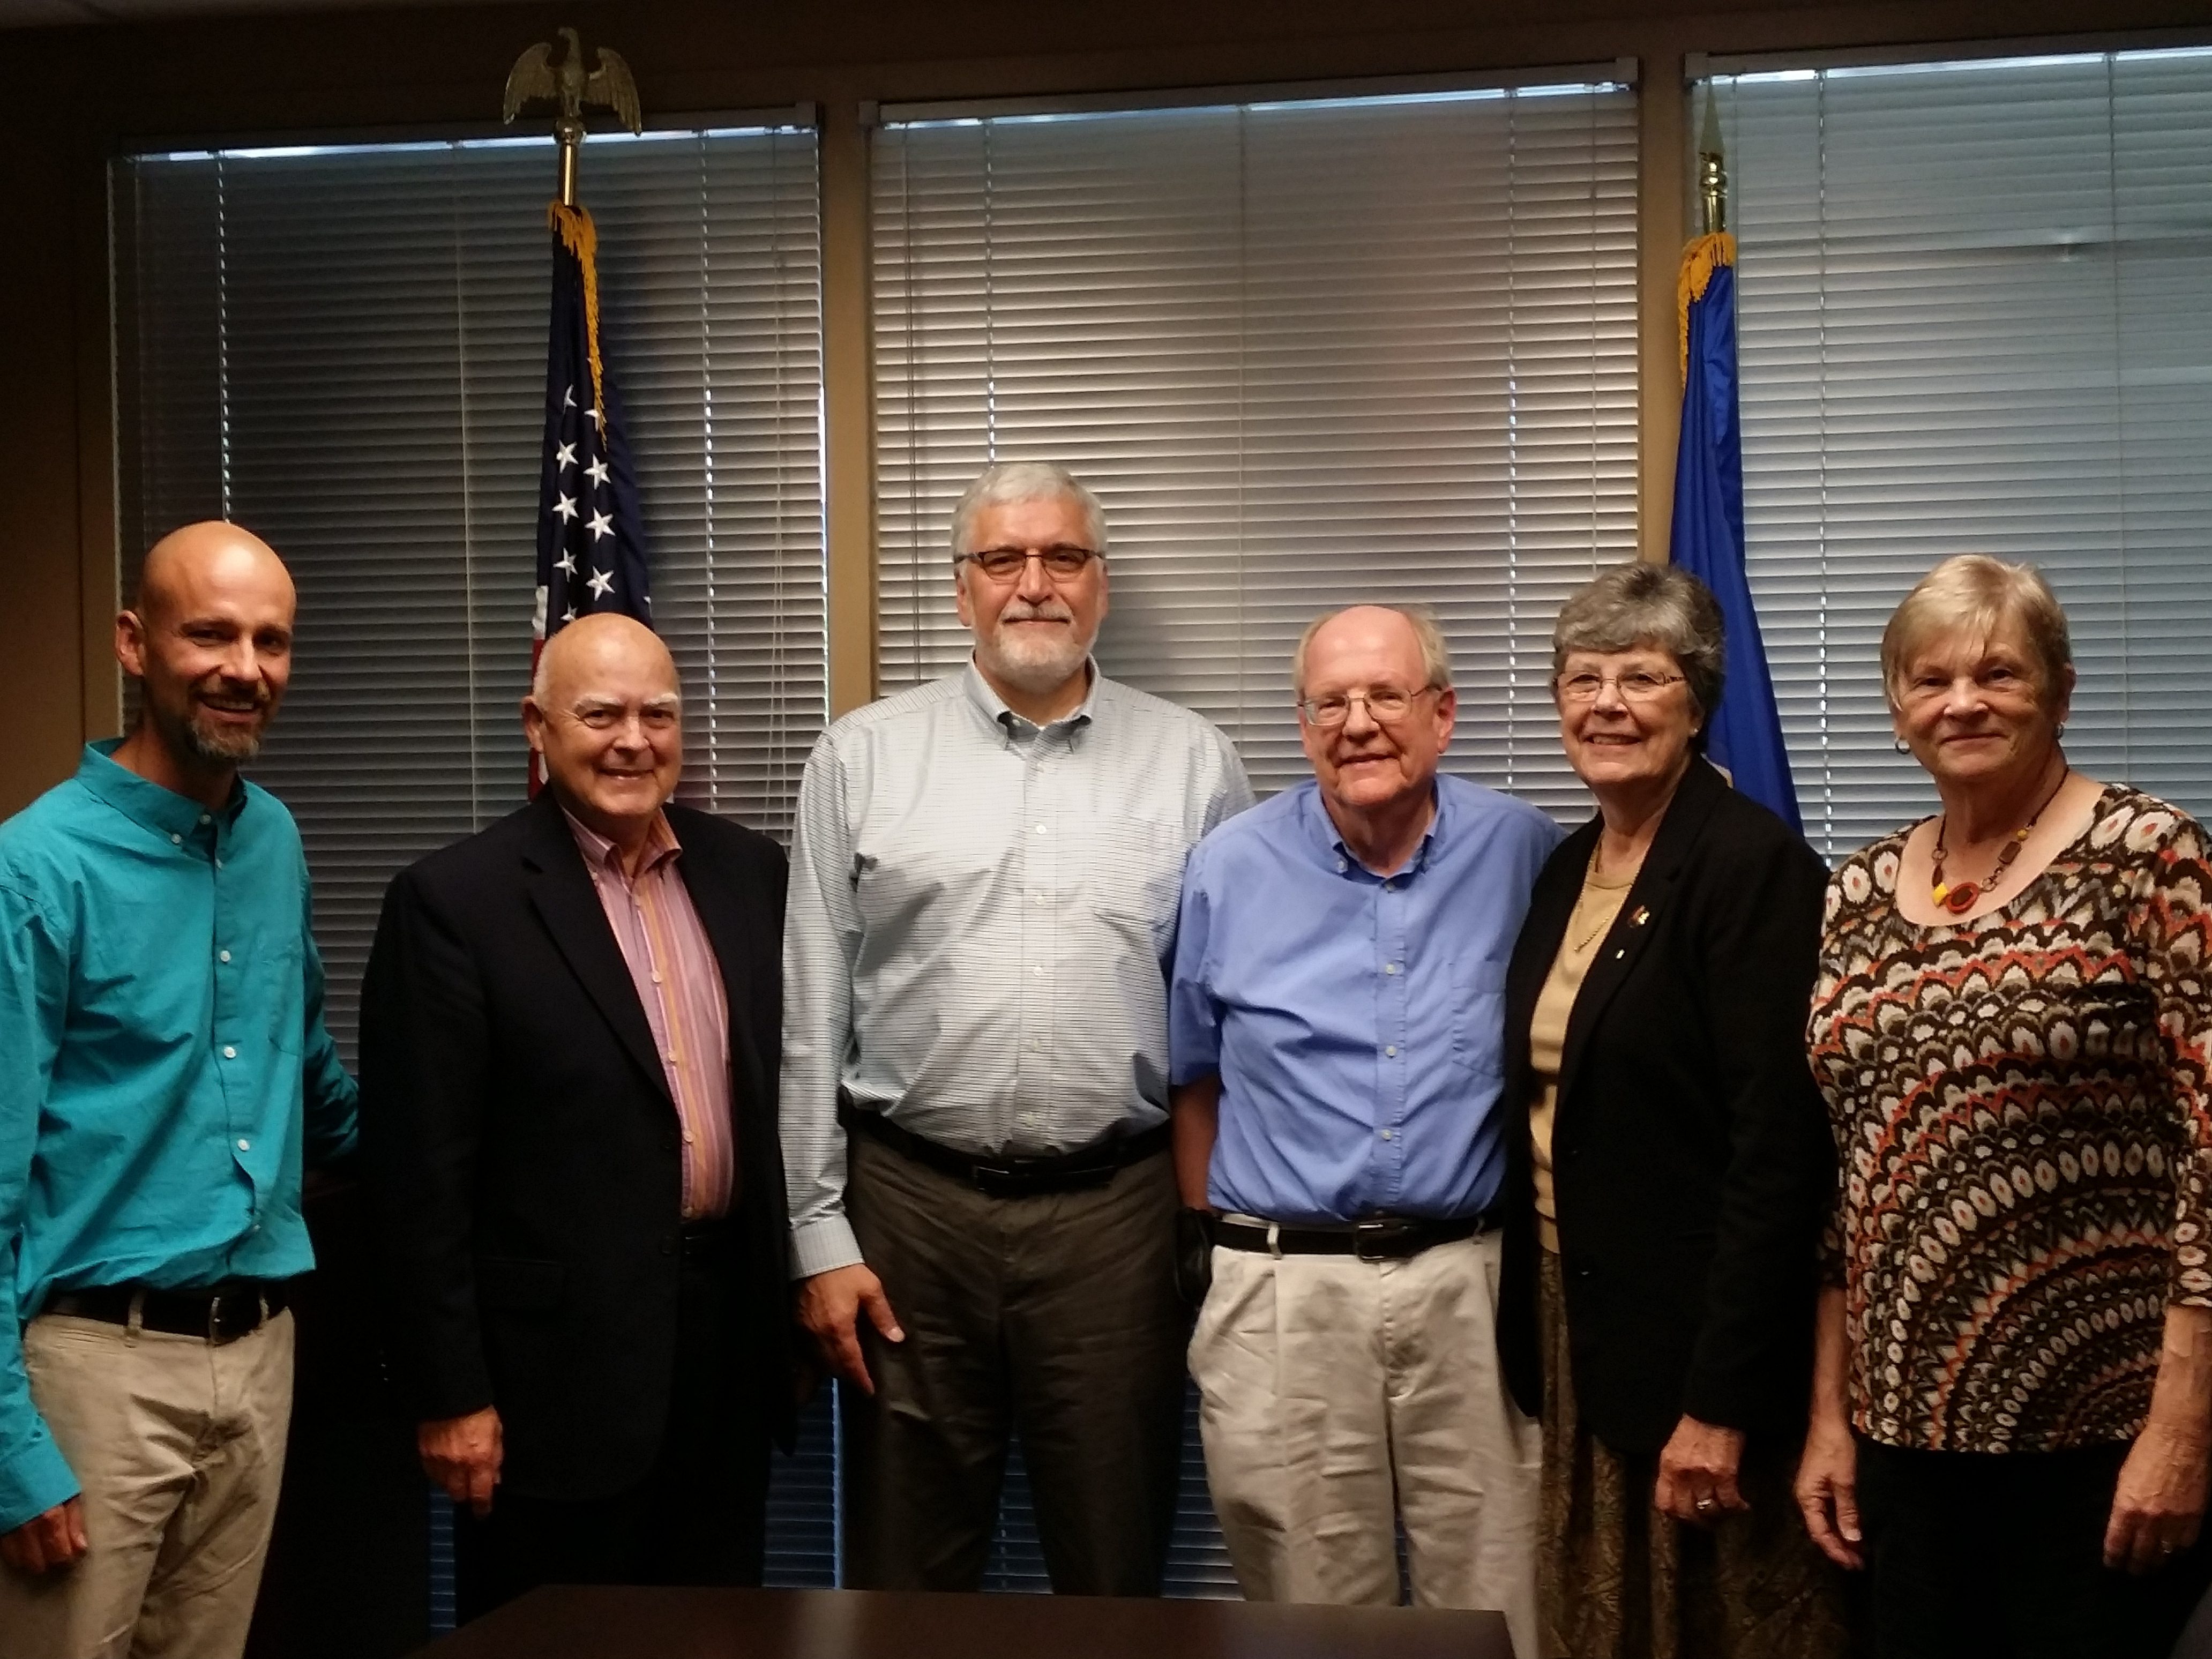 Ed Payne, second from left, with members of the Minnesota Bread Team during a meeting at the office of Sen. Amy Klobuchar (D-MN).